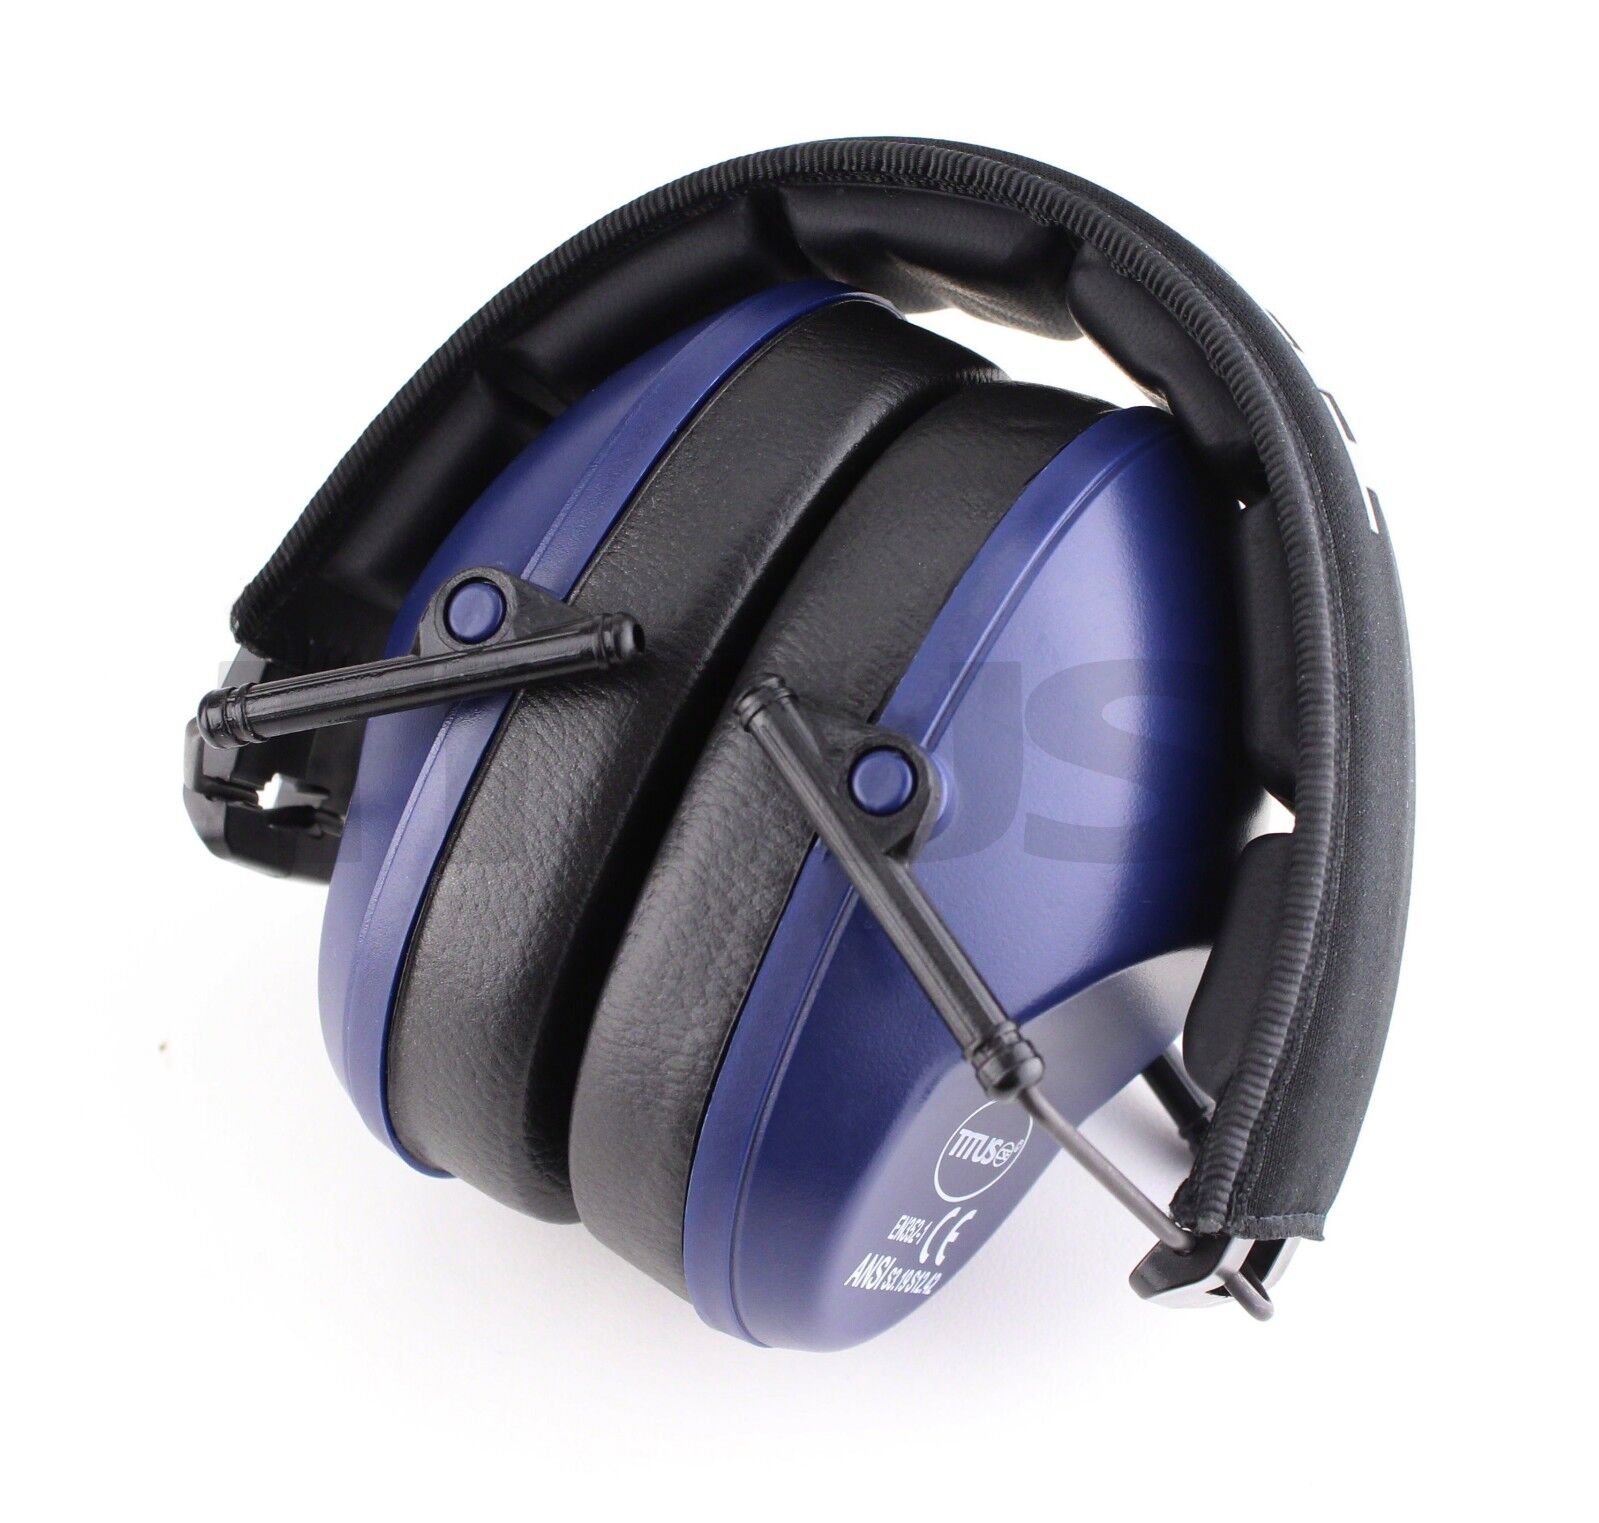 Titus XL Earmuffs Hearing Protection Blue Eagle 24 NRR Rated 